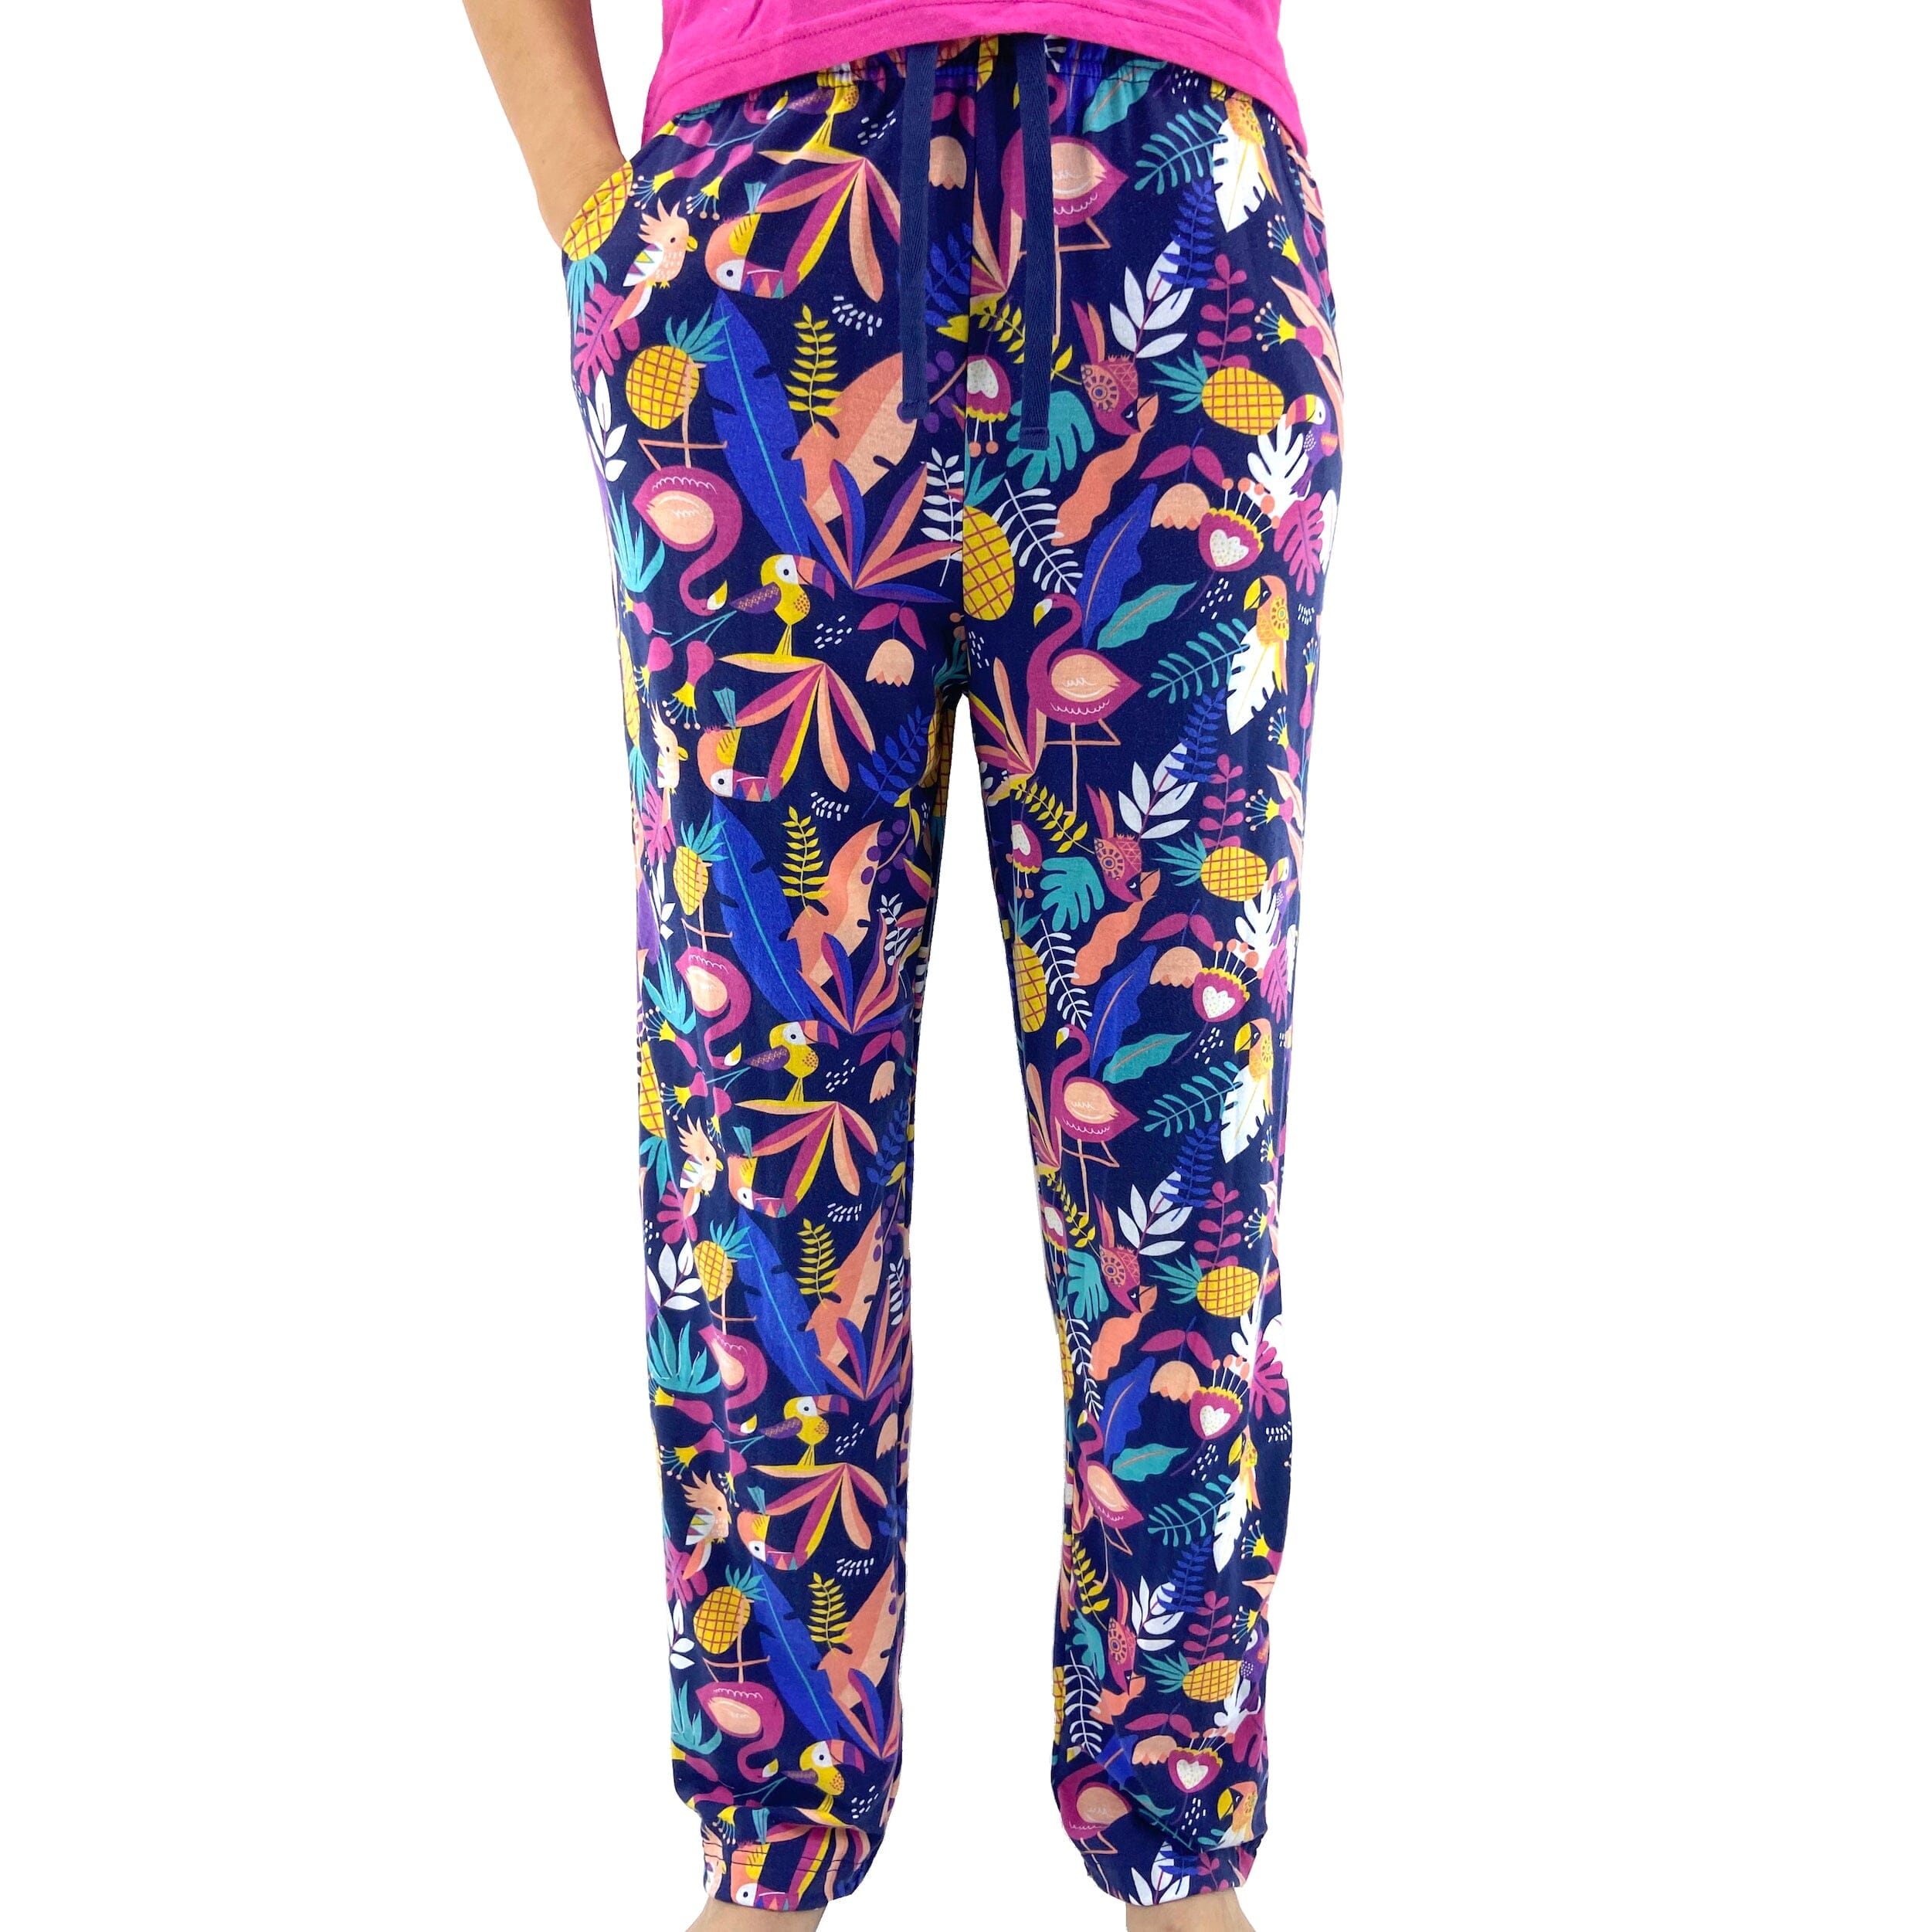 Lounge pants long jersey flowers multicolored - Mix & Relax